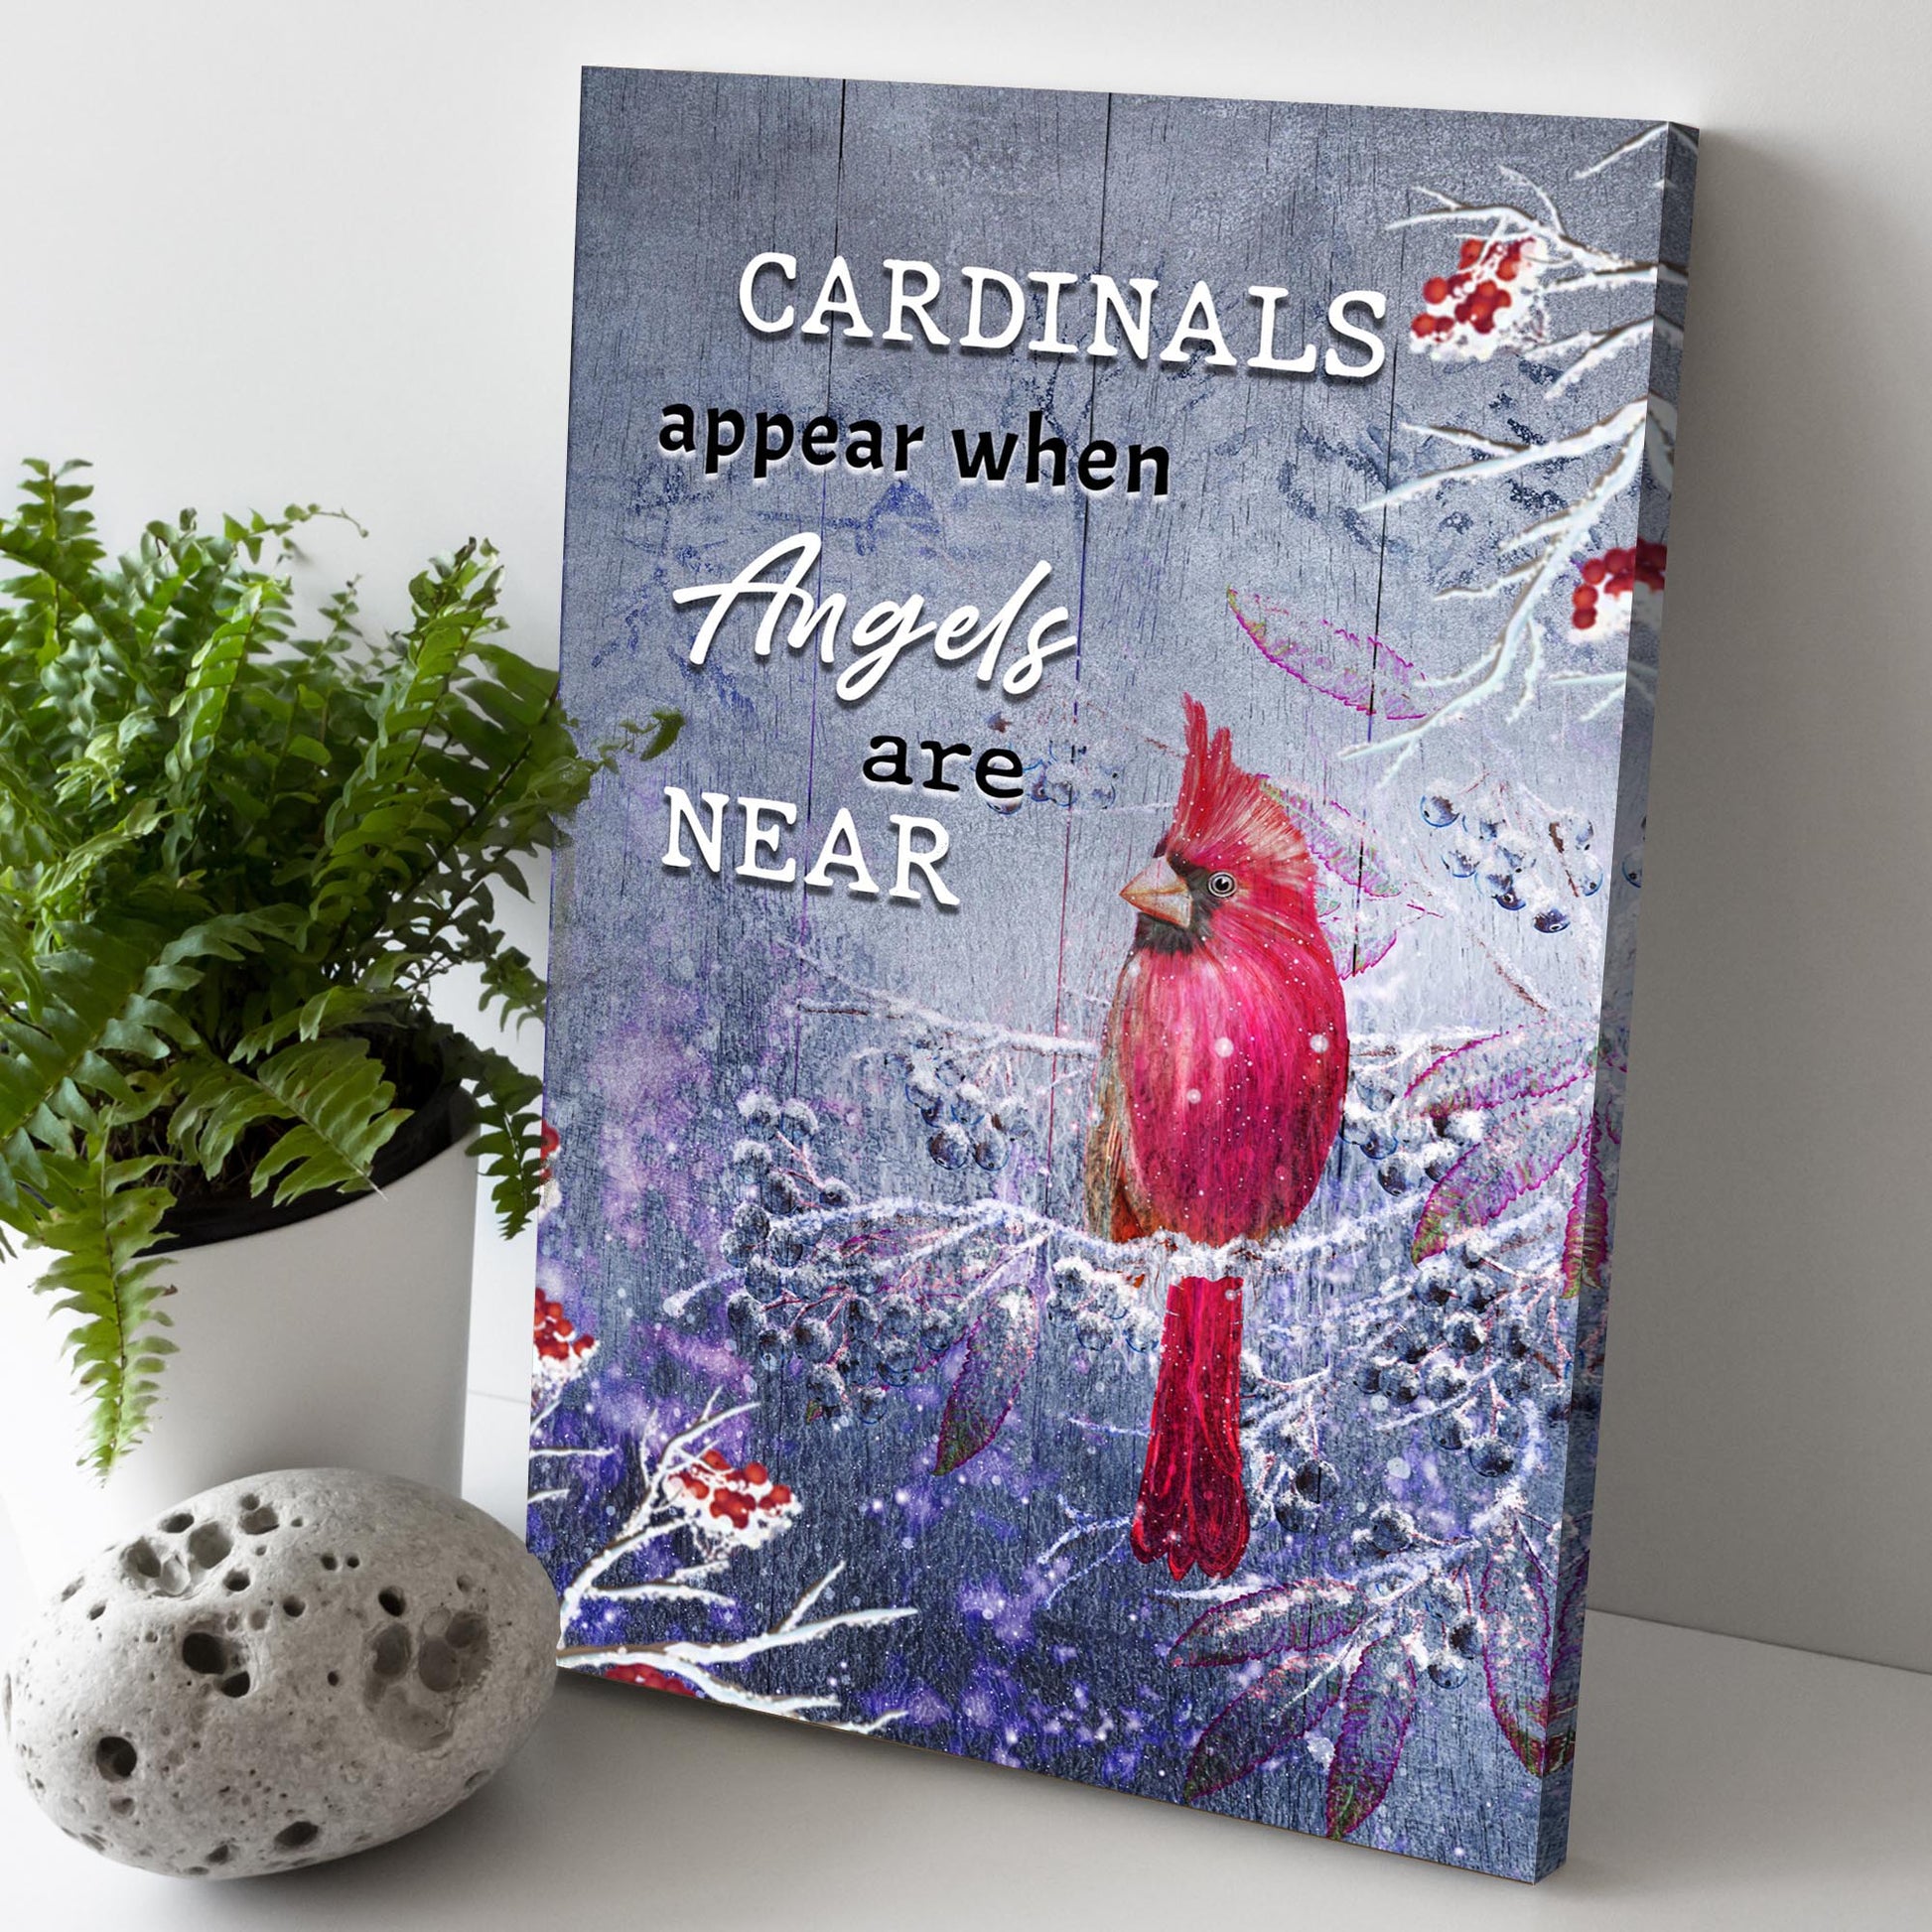 Cardinals Appear When Angels Are Near Sign III  - Image by Tailored Canvases